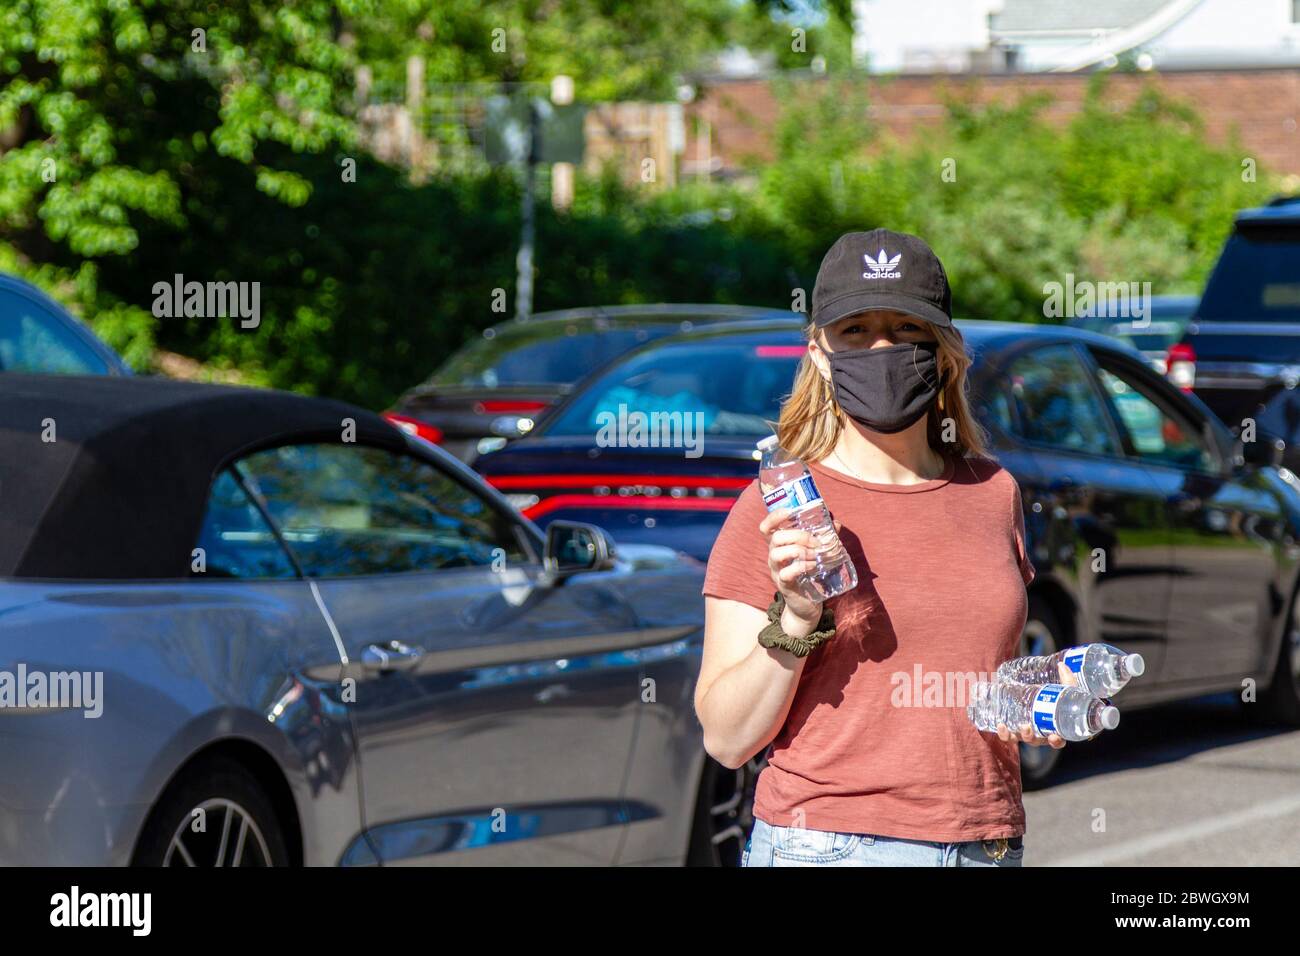 Minneapolis, United States. 30th May, 2020. Minneapolis, MN - May 30, 2020: Volunteer hands out water at the aftermath scene of the George Floyd Black Lives Matter protest and riots on May 30, 2020 in Minneapolis, Minnesota. Credit: Jake Handegard/The Photo Access Credit: The Photo Access/Alamy Live News Stock Photo